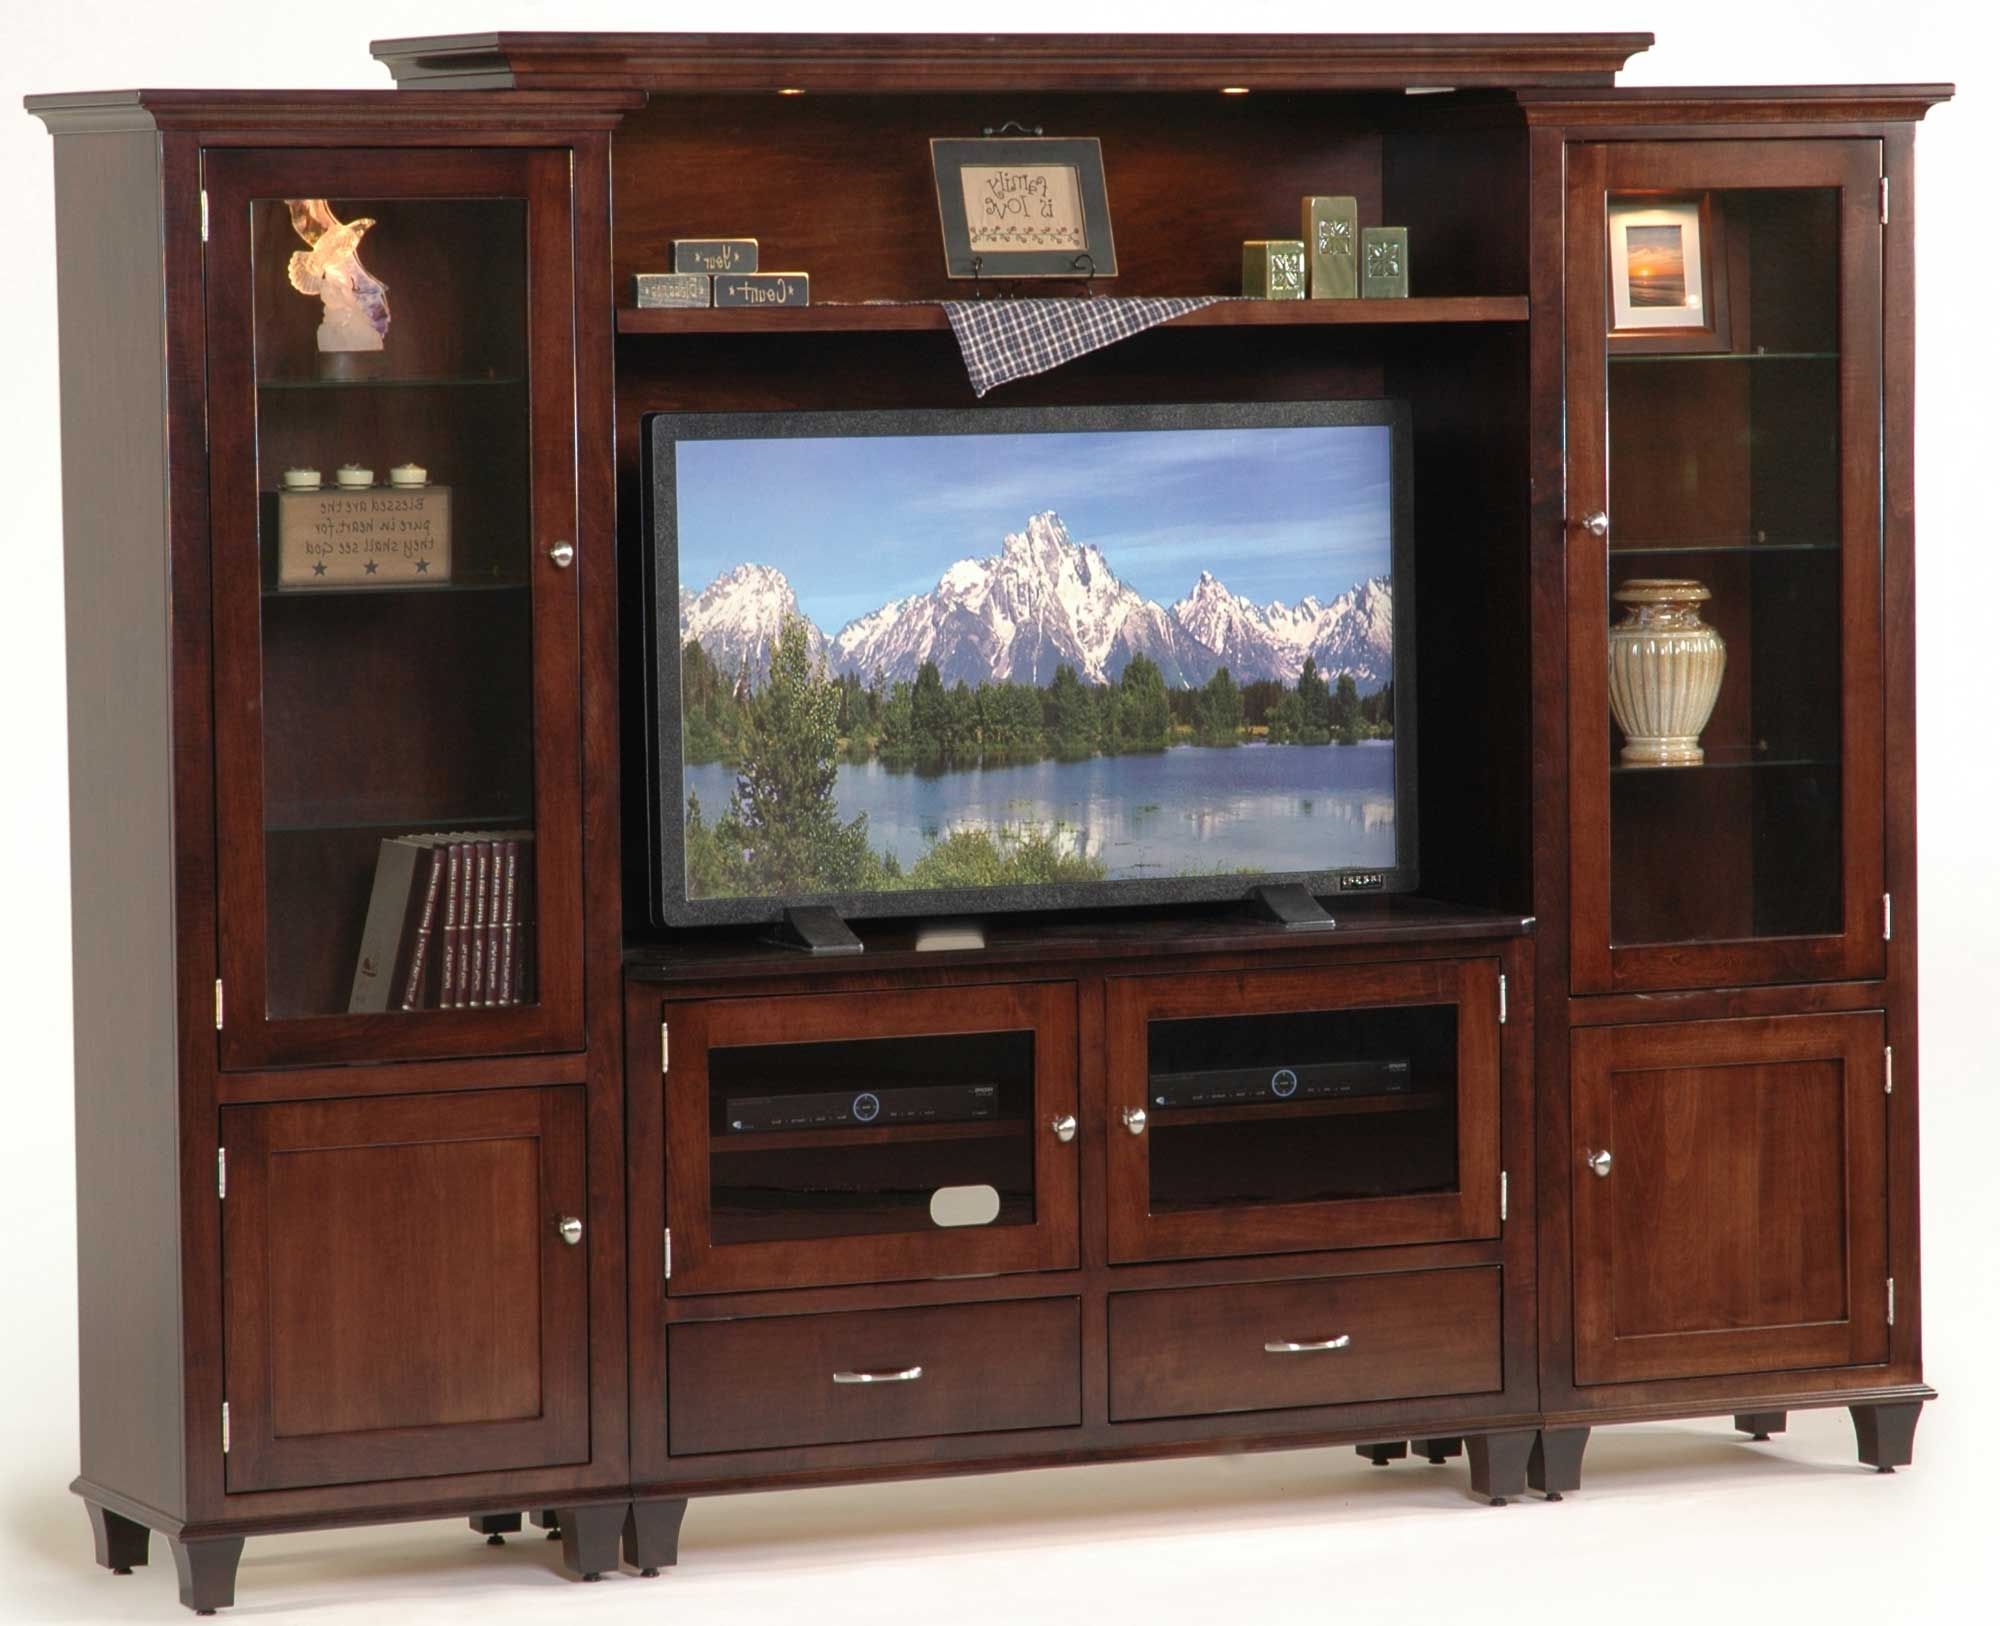 Wall Entertainment Unit | Furniture Tree In Entertainment Units With Bridge (Gallery 16 of 20)